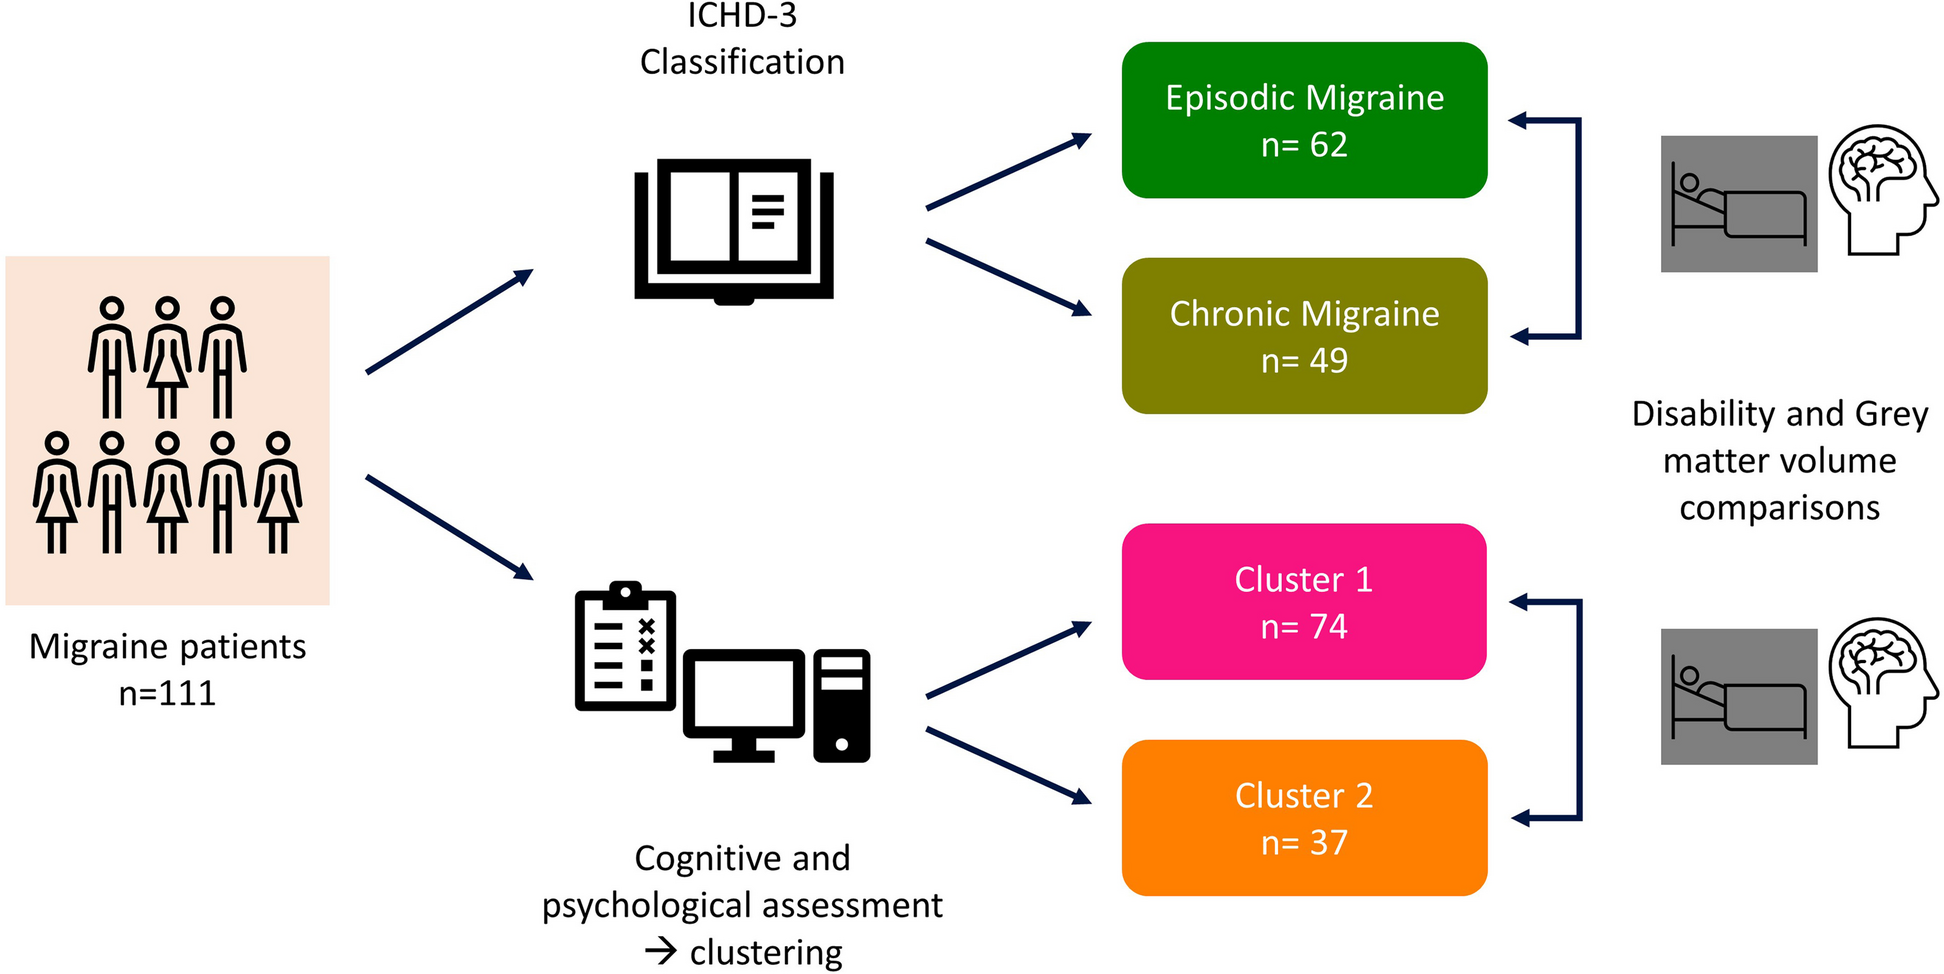 Specific cognitive and psychological alterations are more strongly linked to increased migraine disability than chronic migraine diagnosis